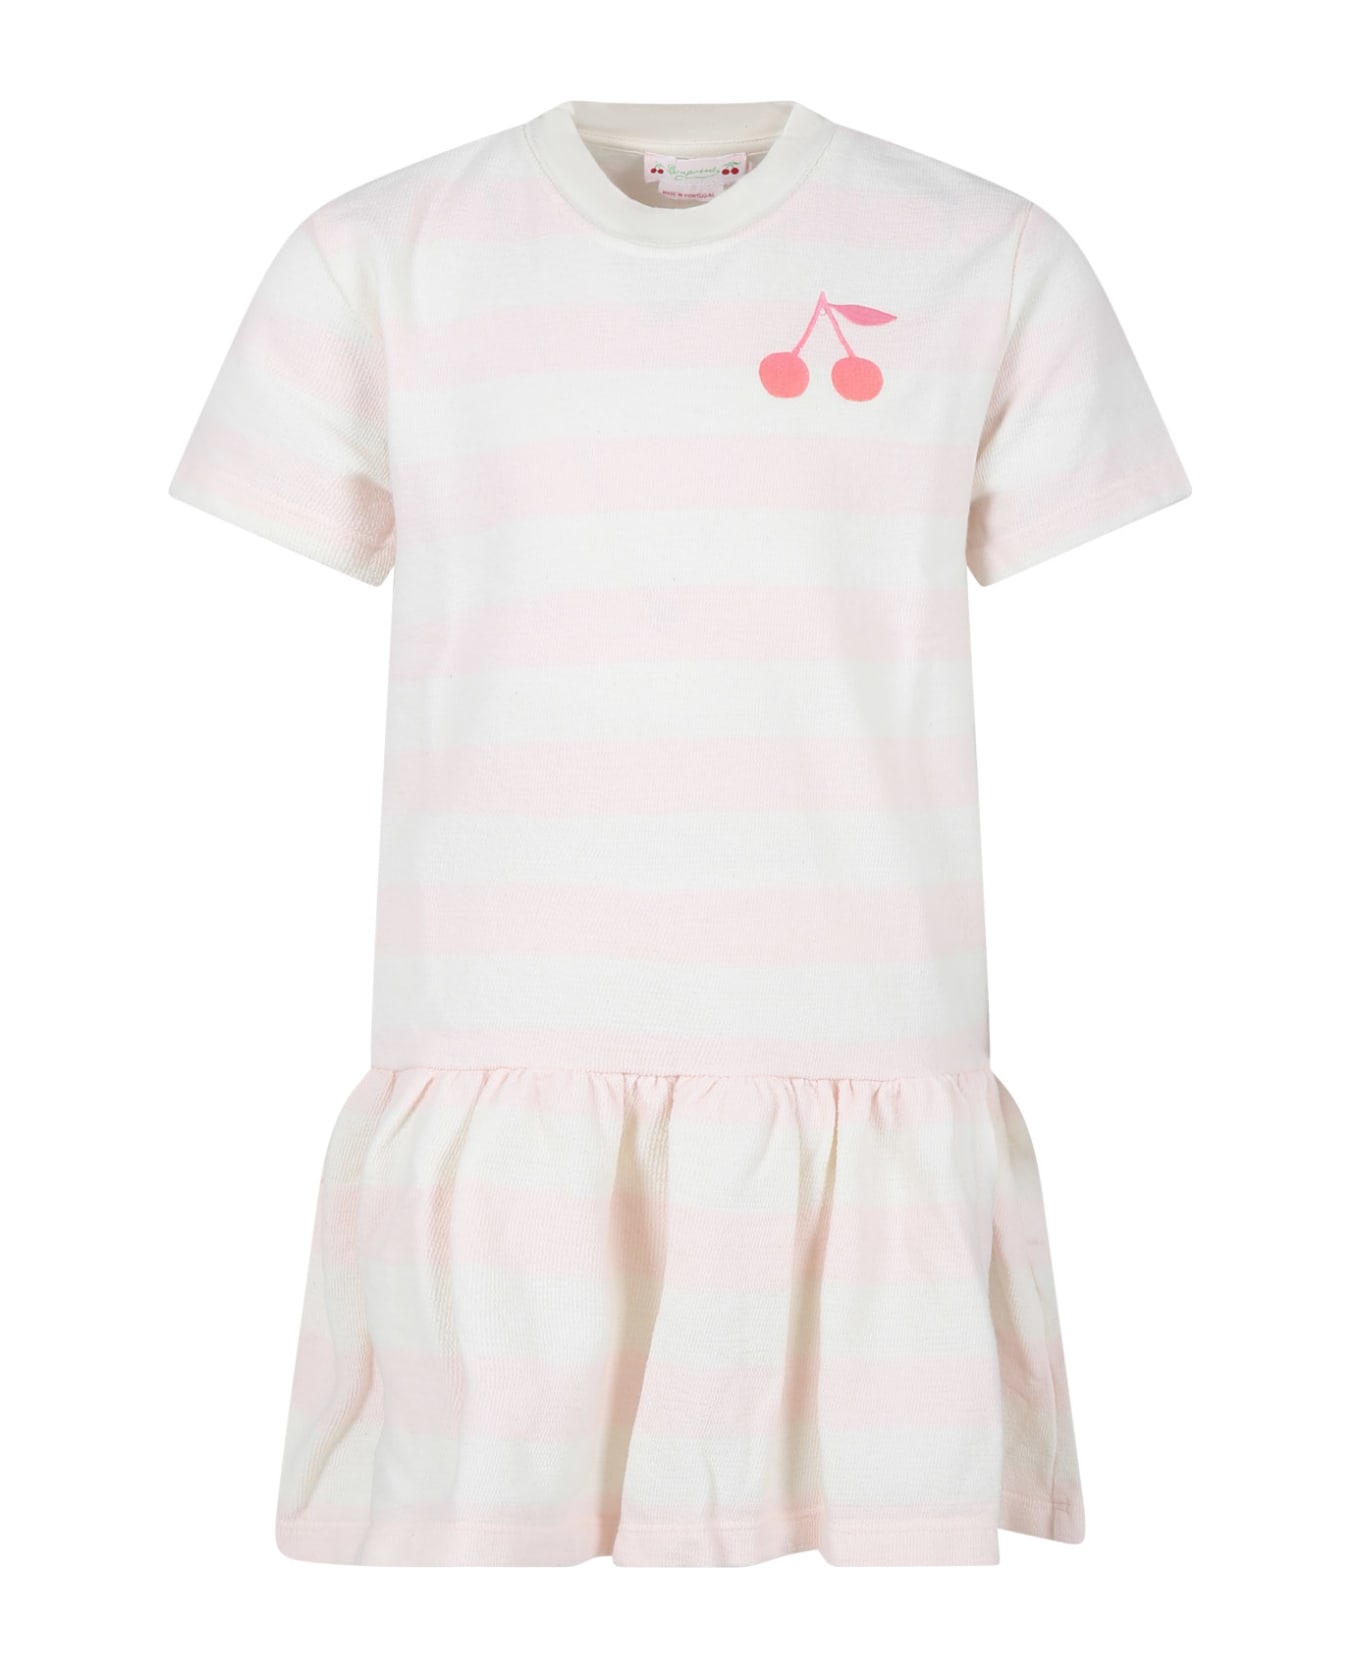 Bonpoint Ivory Dress For Girl With Iconic Cherries - White ワンピース＆ドレス